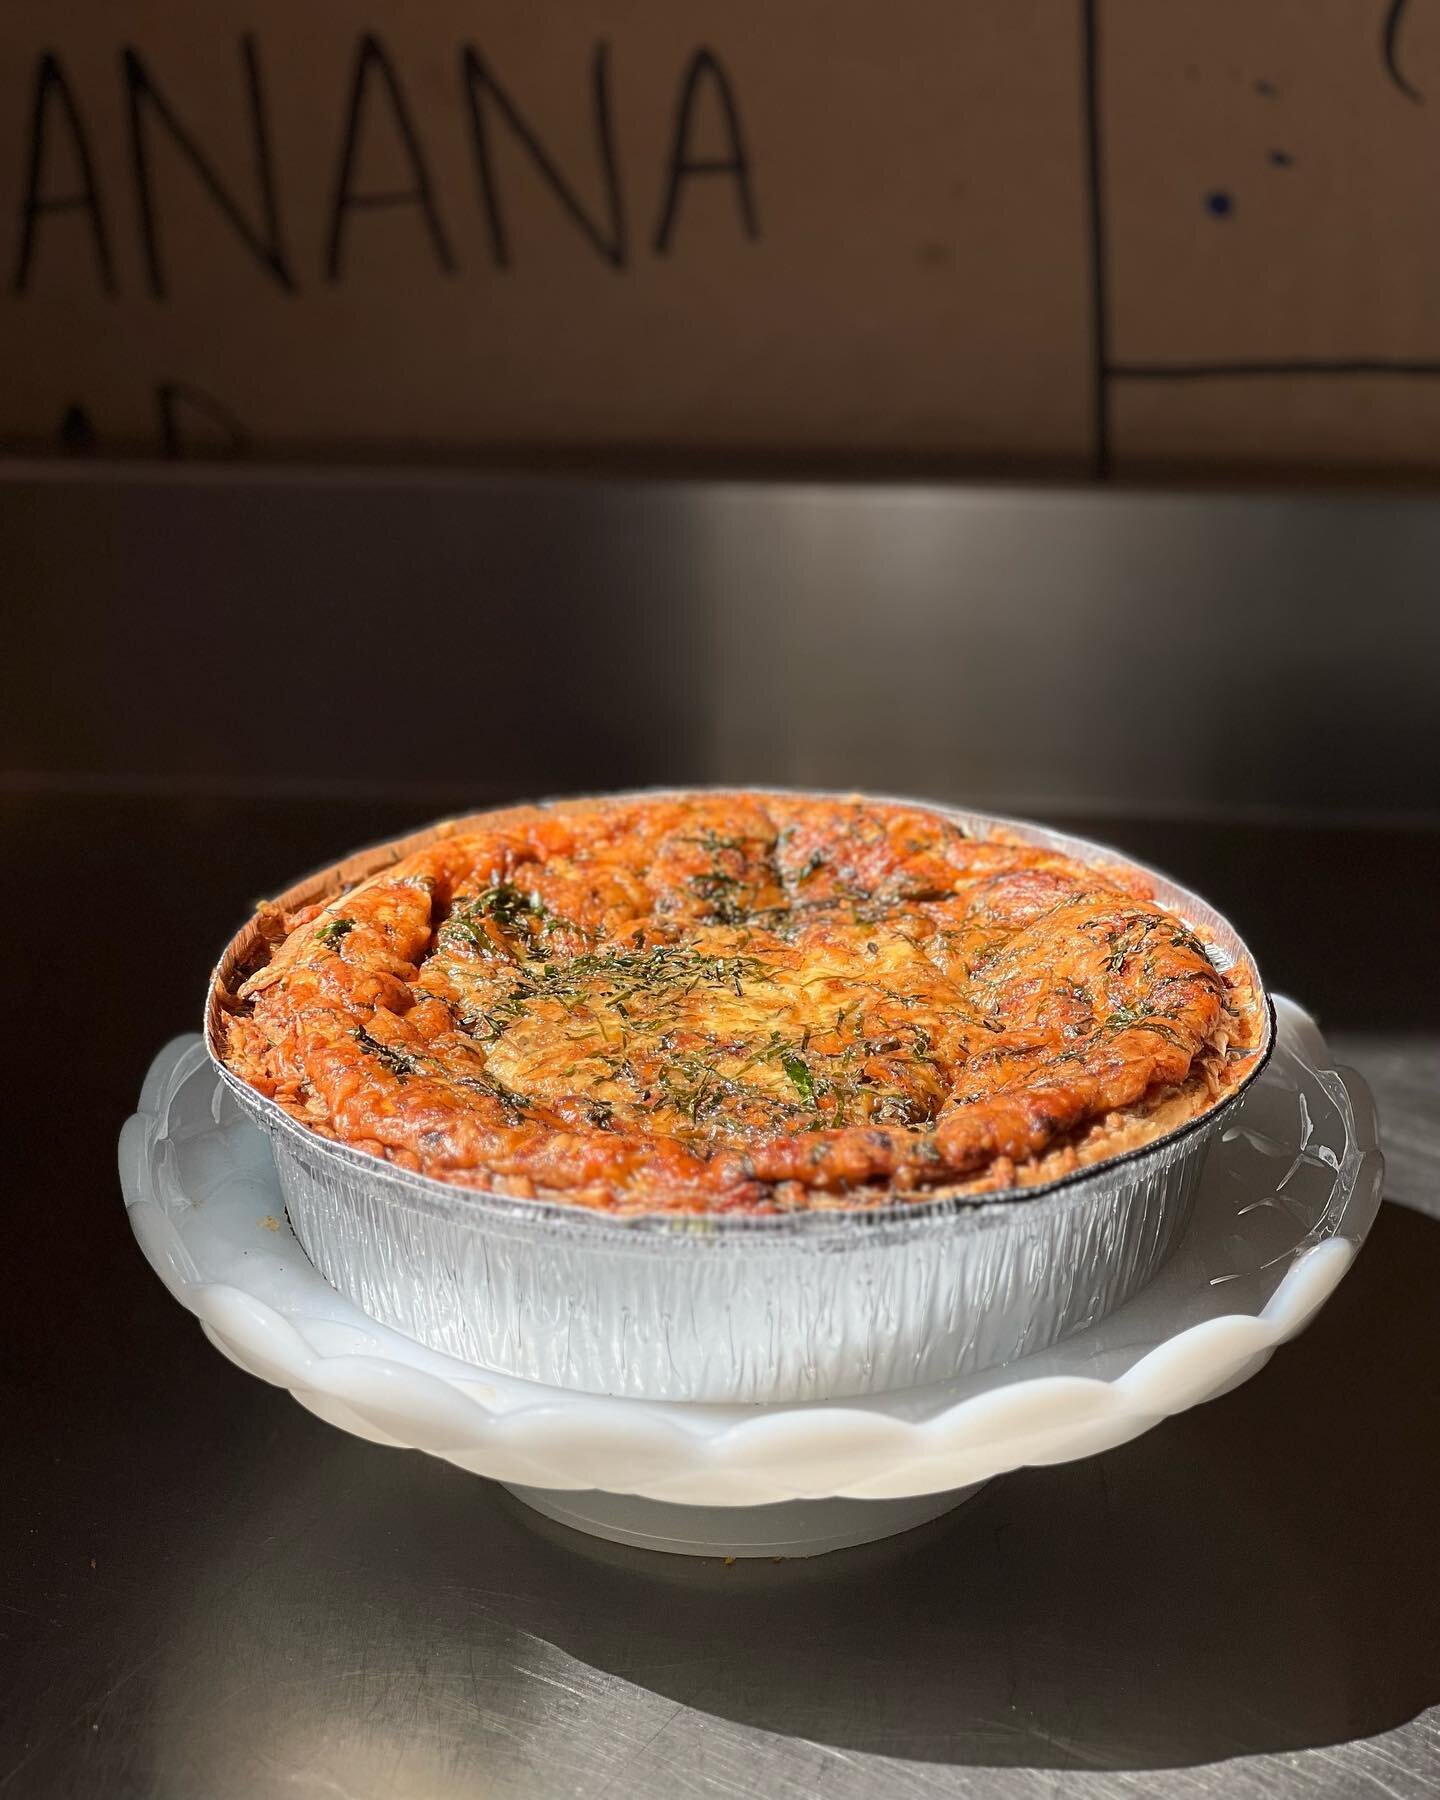 Mother&rsquo;s Day pre-orders are live! Head to the link in our bio, or our website, to place your order for Saturday 5/13 or Sunday 5/14 pick up. 

Choose from our 9&rdquo; Green Goddess quiche (pictured here), Mindy&rsquo;s Strawberry Rhubarb pie, 